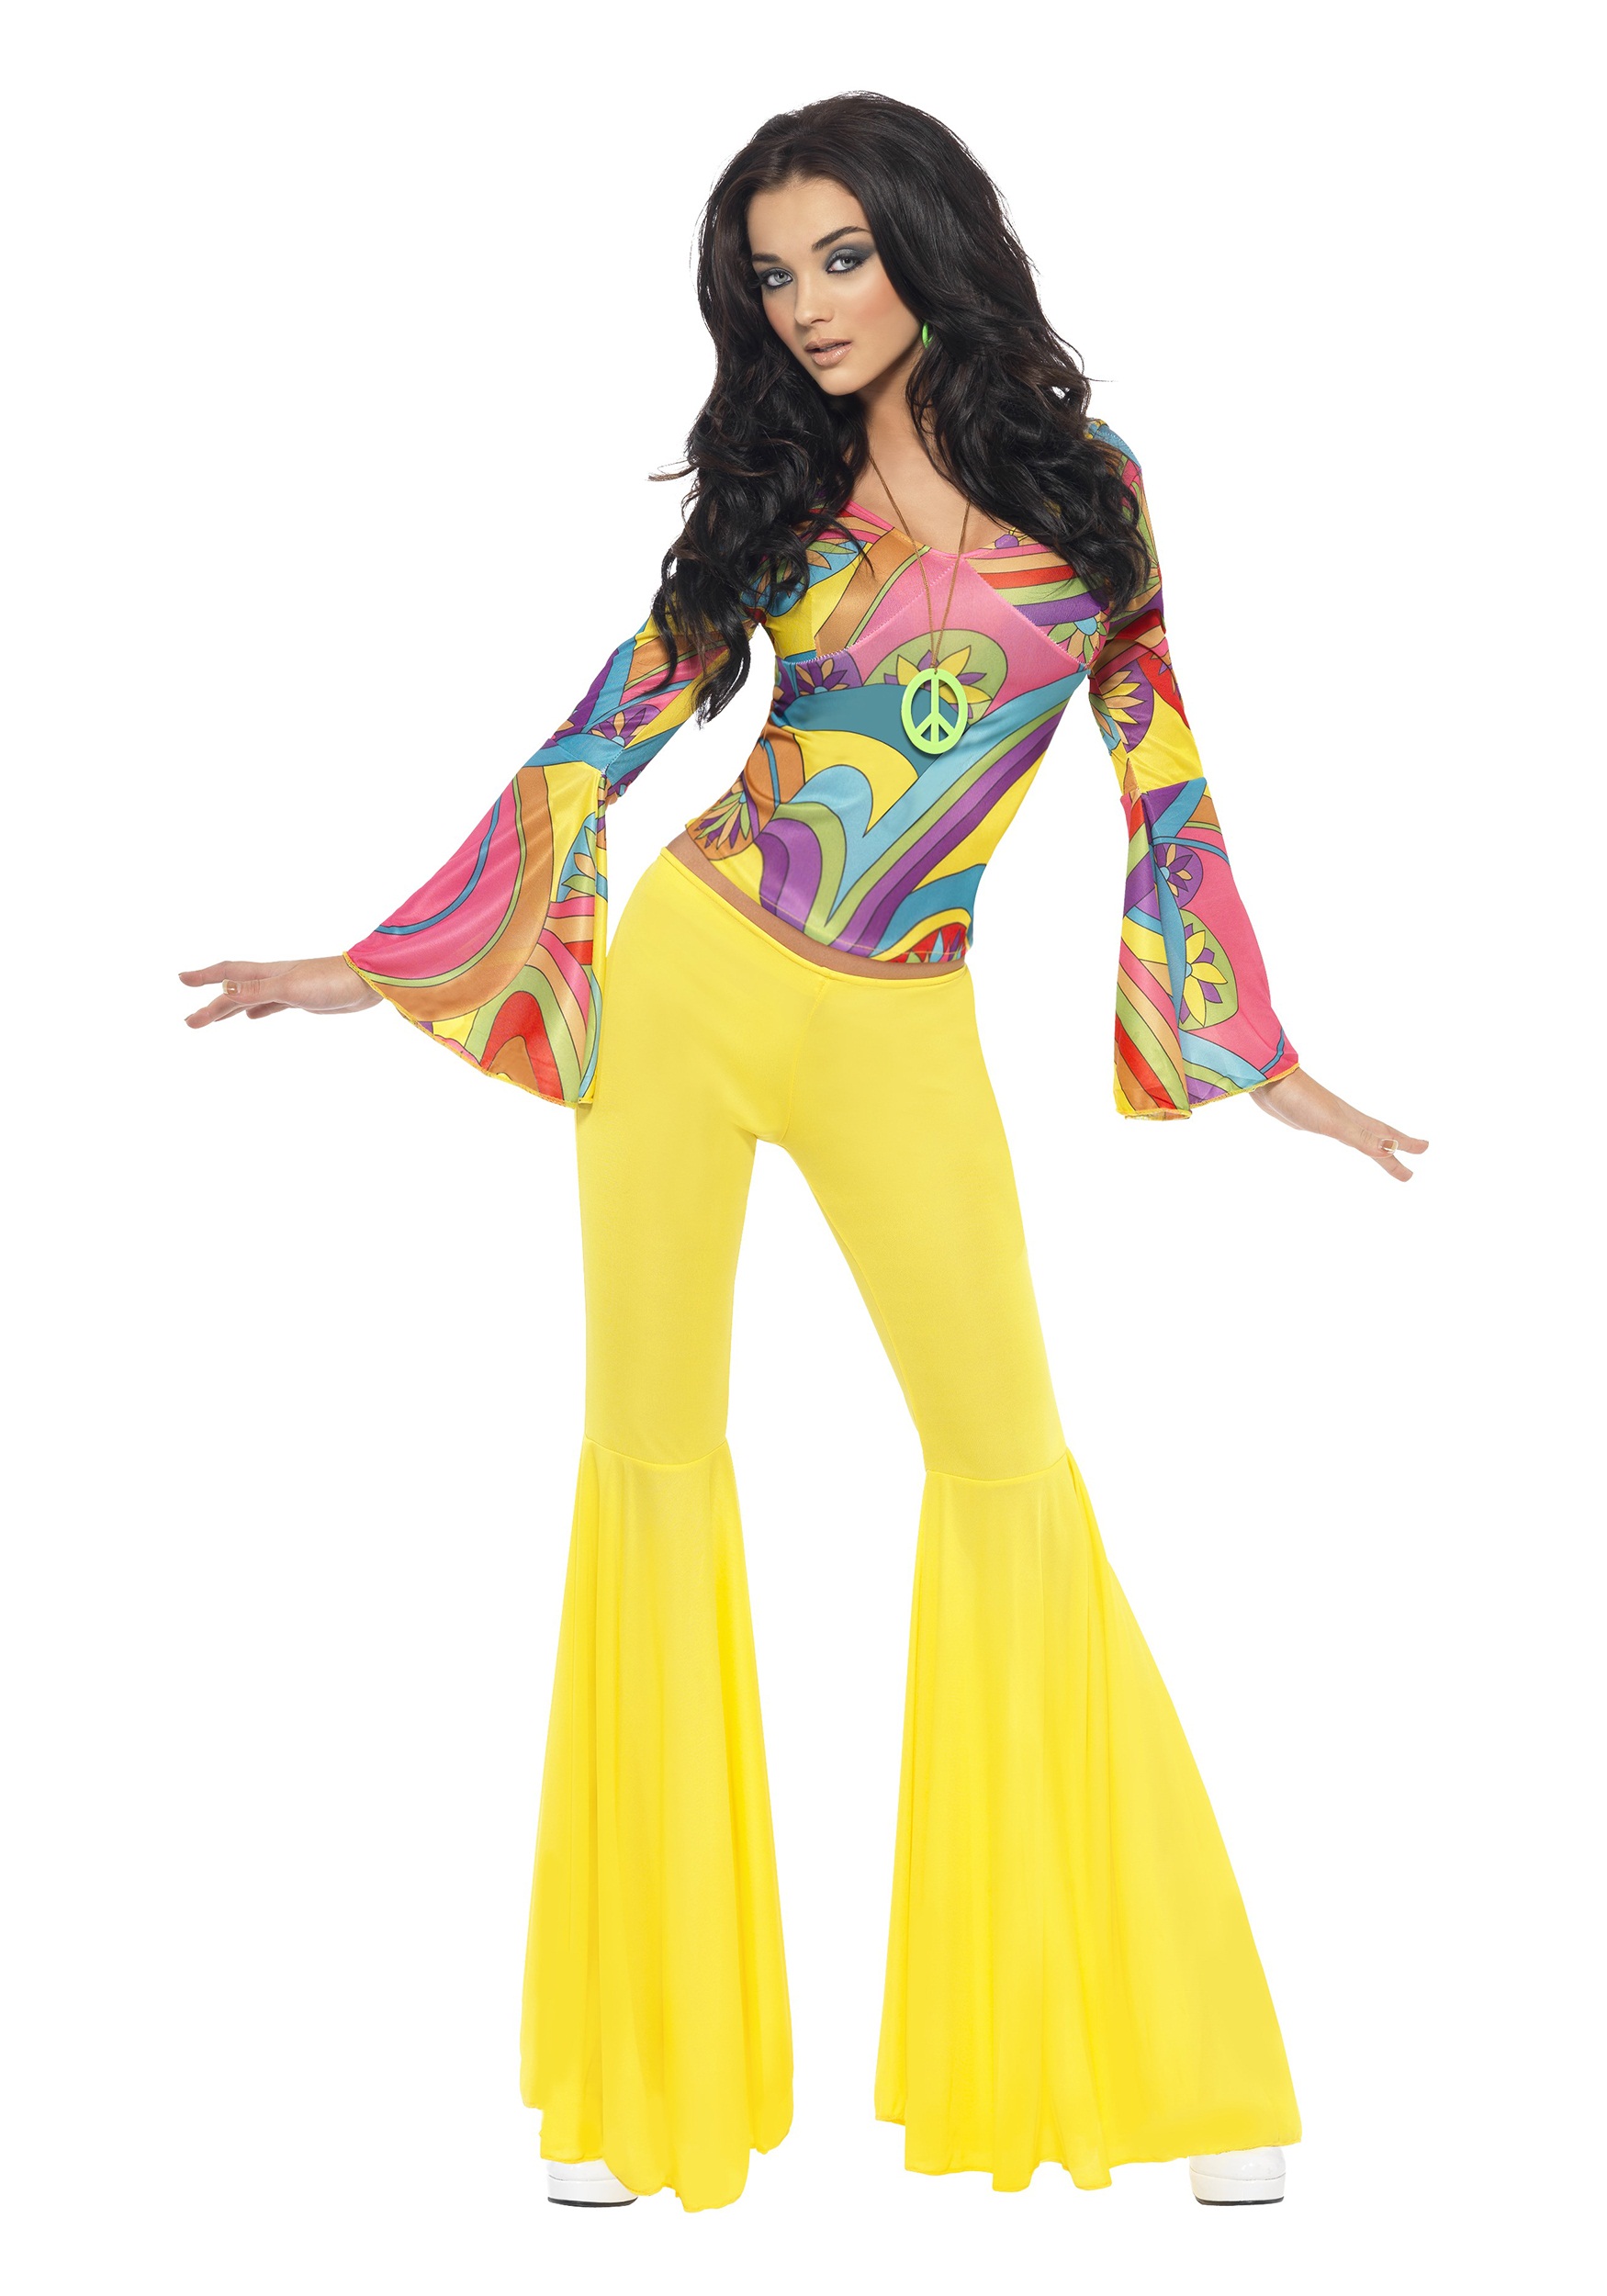 Groovy Gal Costume for Women